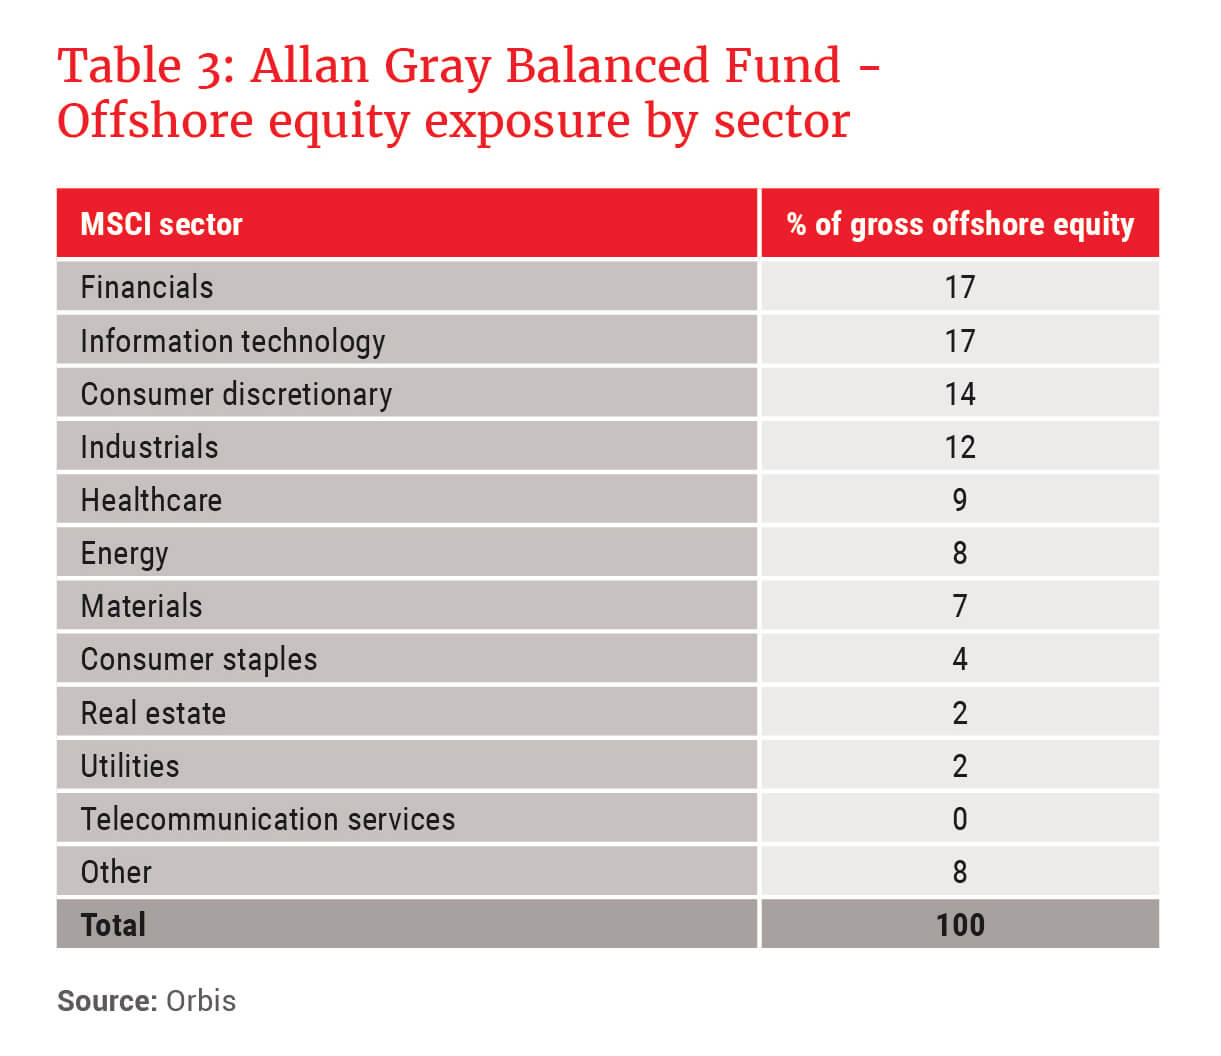 Allan Gray Balanced Fund - Offshore equity exposure by sector